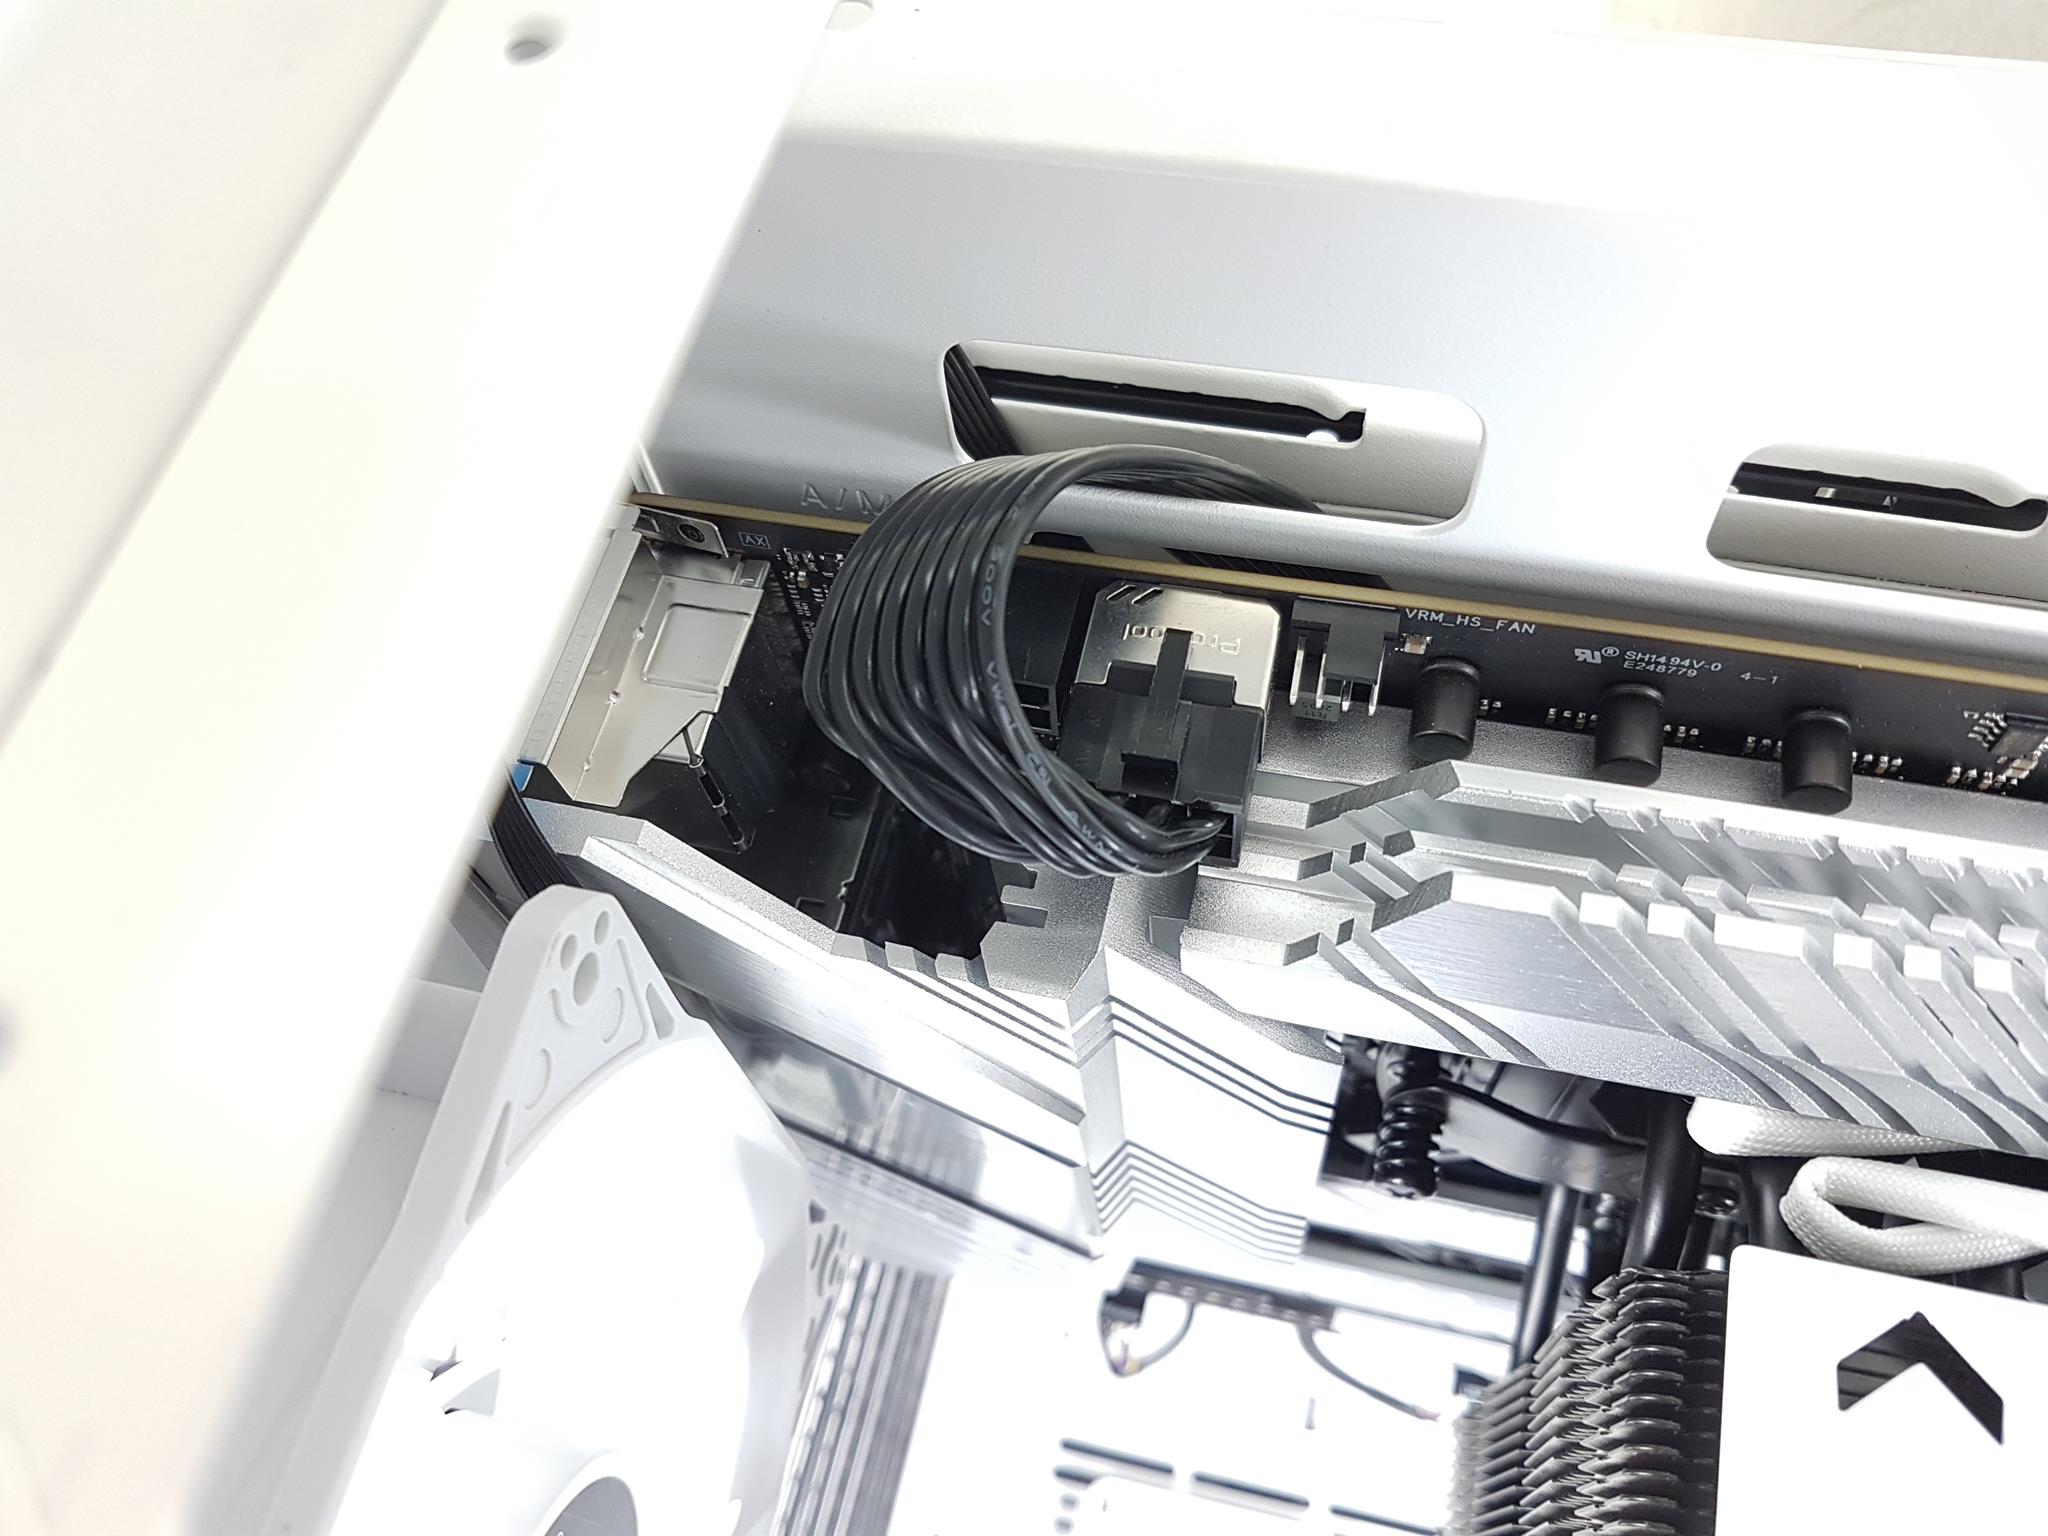 thermaltake view Test Build and Experience 24 pin ATX cable